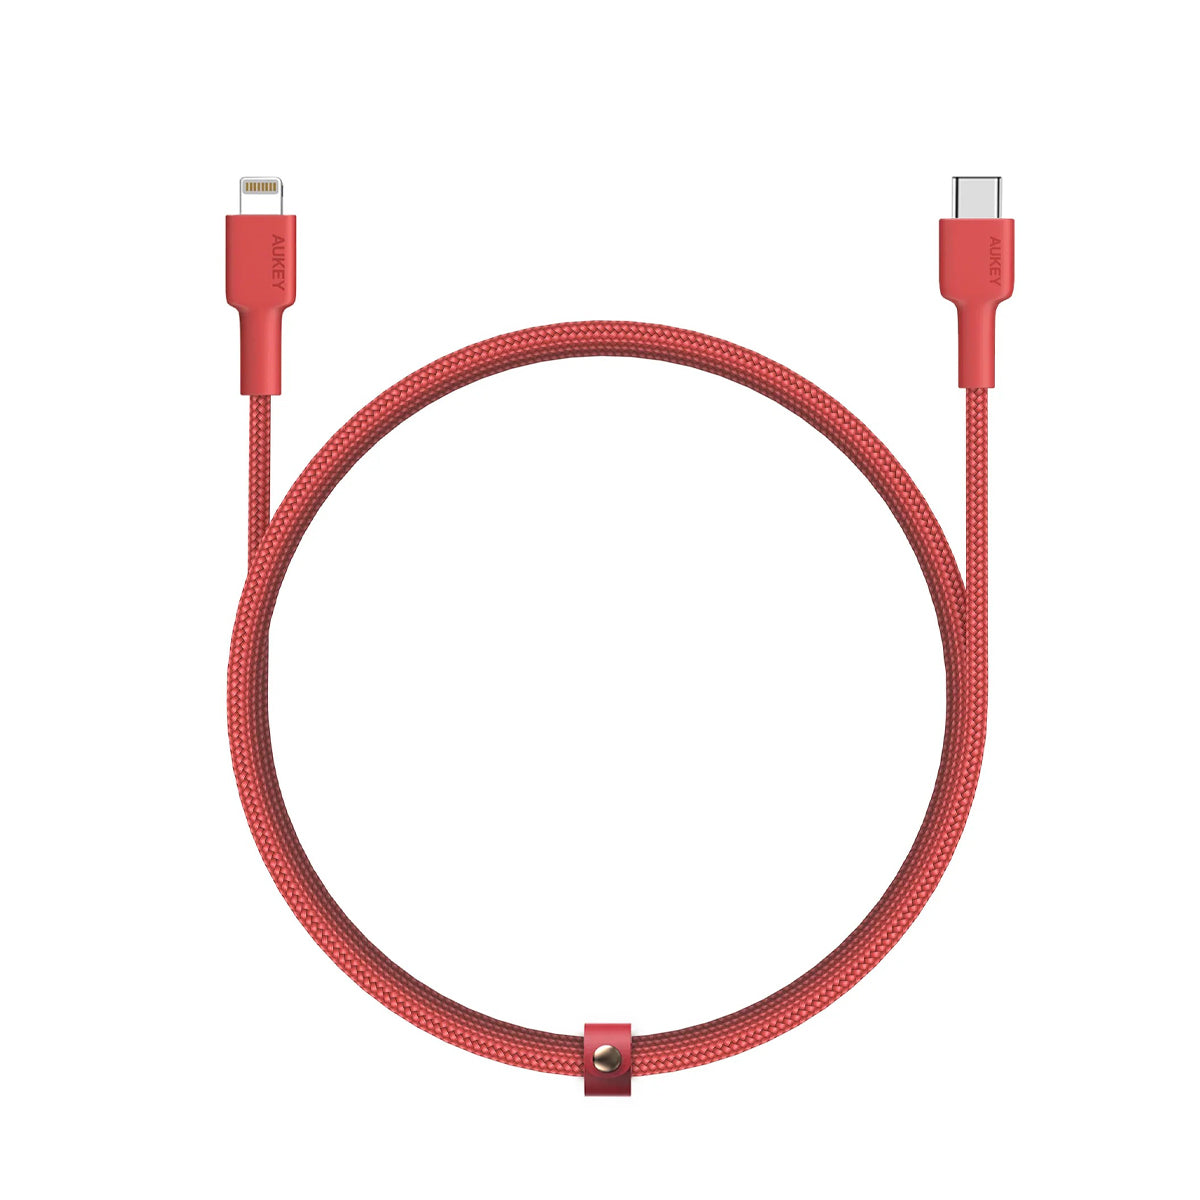 Aukey CB-CL2 MFI Braided Nylon USB C To Lightning Cable 2 meter – Red , LLTSN1004572,CB-CL2 RED